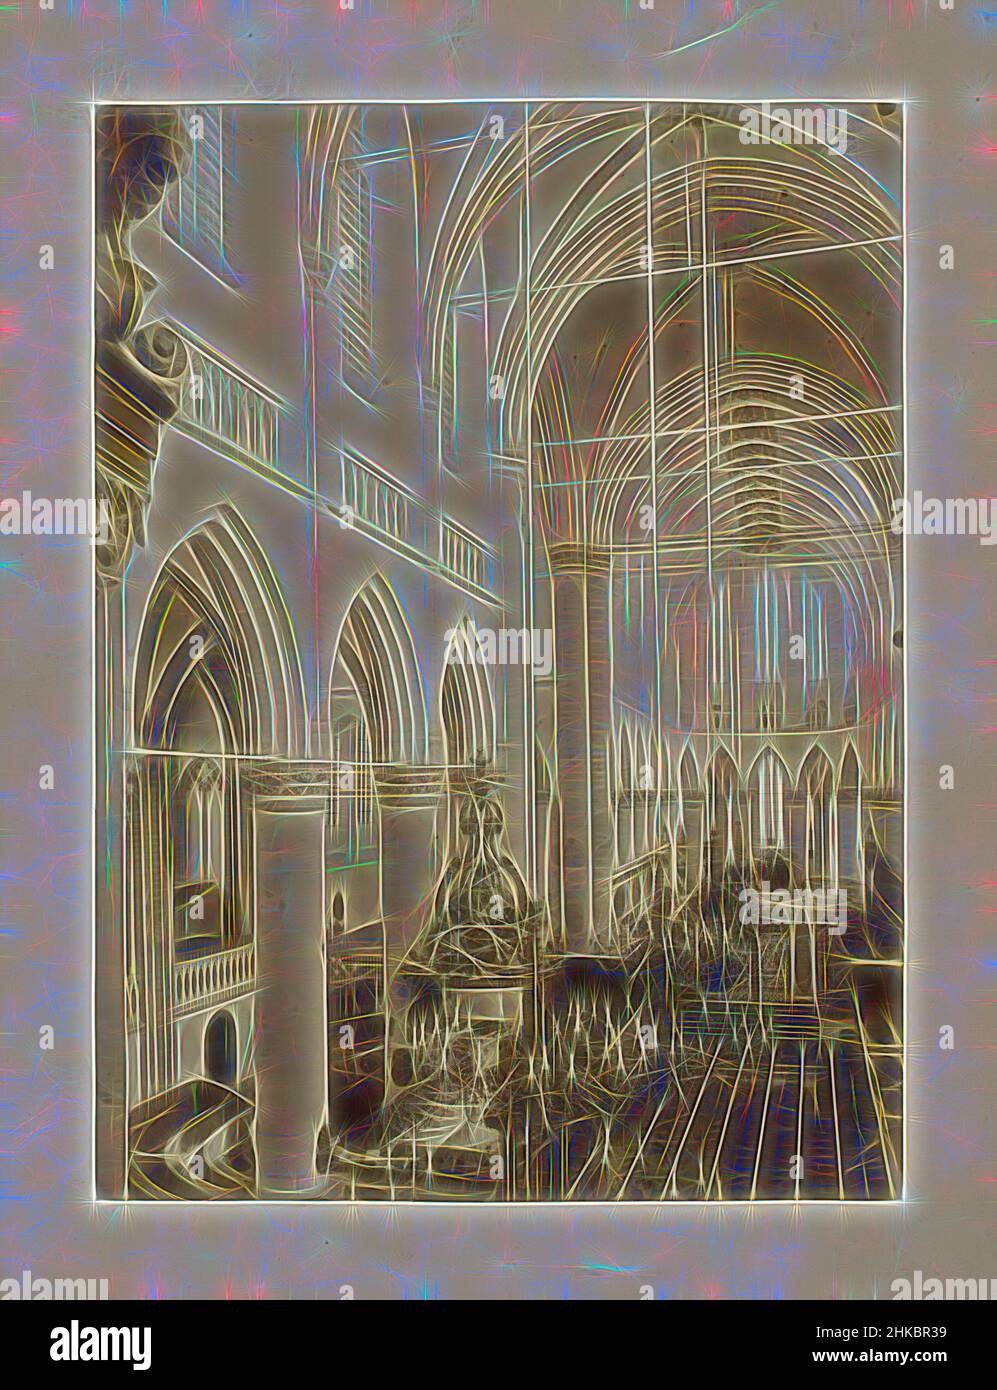 Inspired by Interior of the Great or Our Lady's Church in Dordrecht, A.J.M. Mulder, Grote of Onze-Lieve-Vrouwekerk, c. 1880 - c. 1910, albumen print, height 231 mm × width 170 mm, Reimagined by Artotop. Classic art reinvented with a modern twist. Design of warm cheerful glowing of brightness and light ray radiance. Photography inspired by surrealism and futurism, embracing dynamic energy of modern technology, movement, speed and revolutionize culture Stock Photo